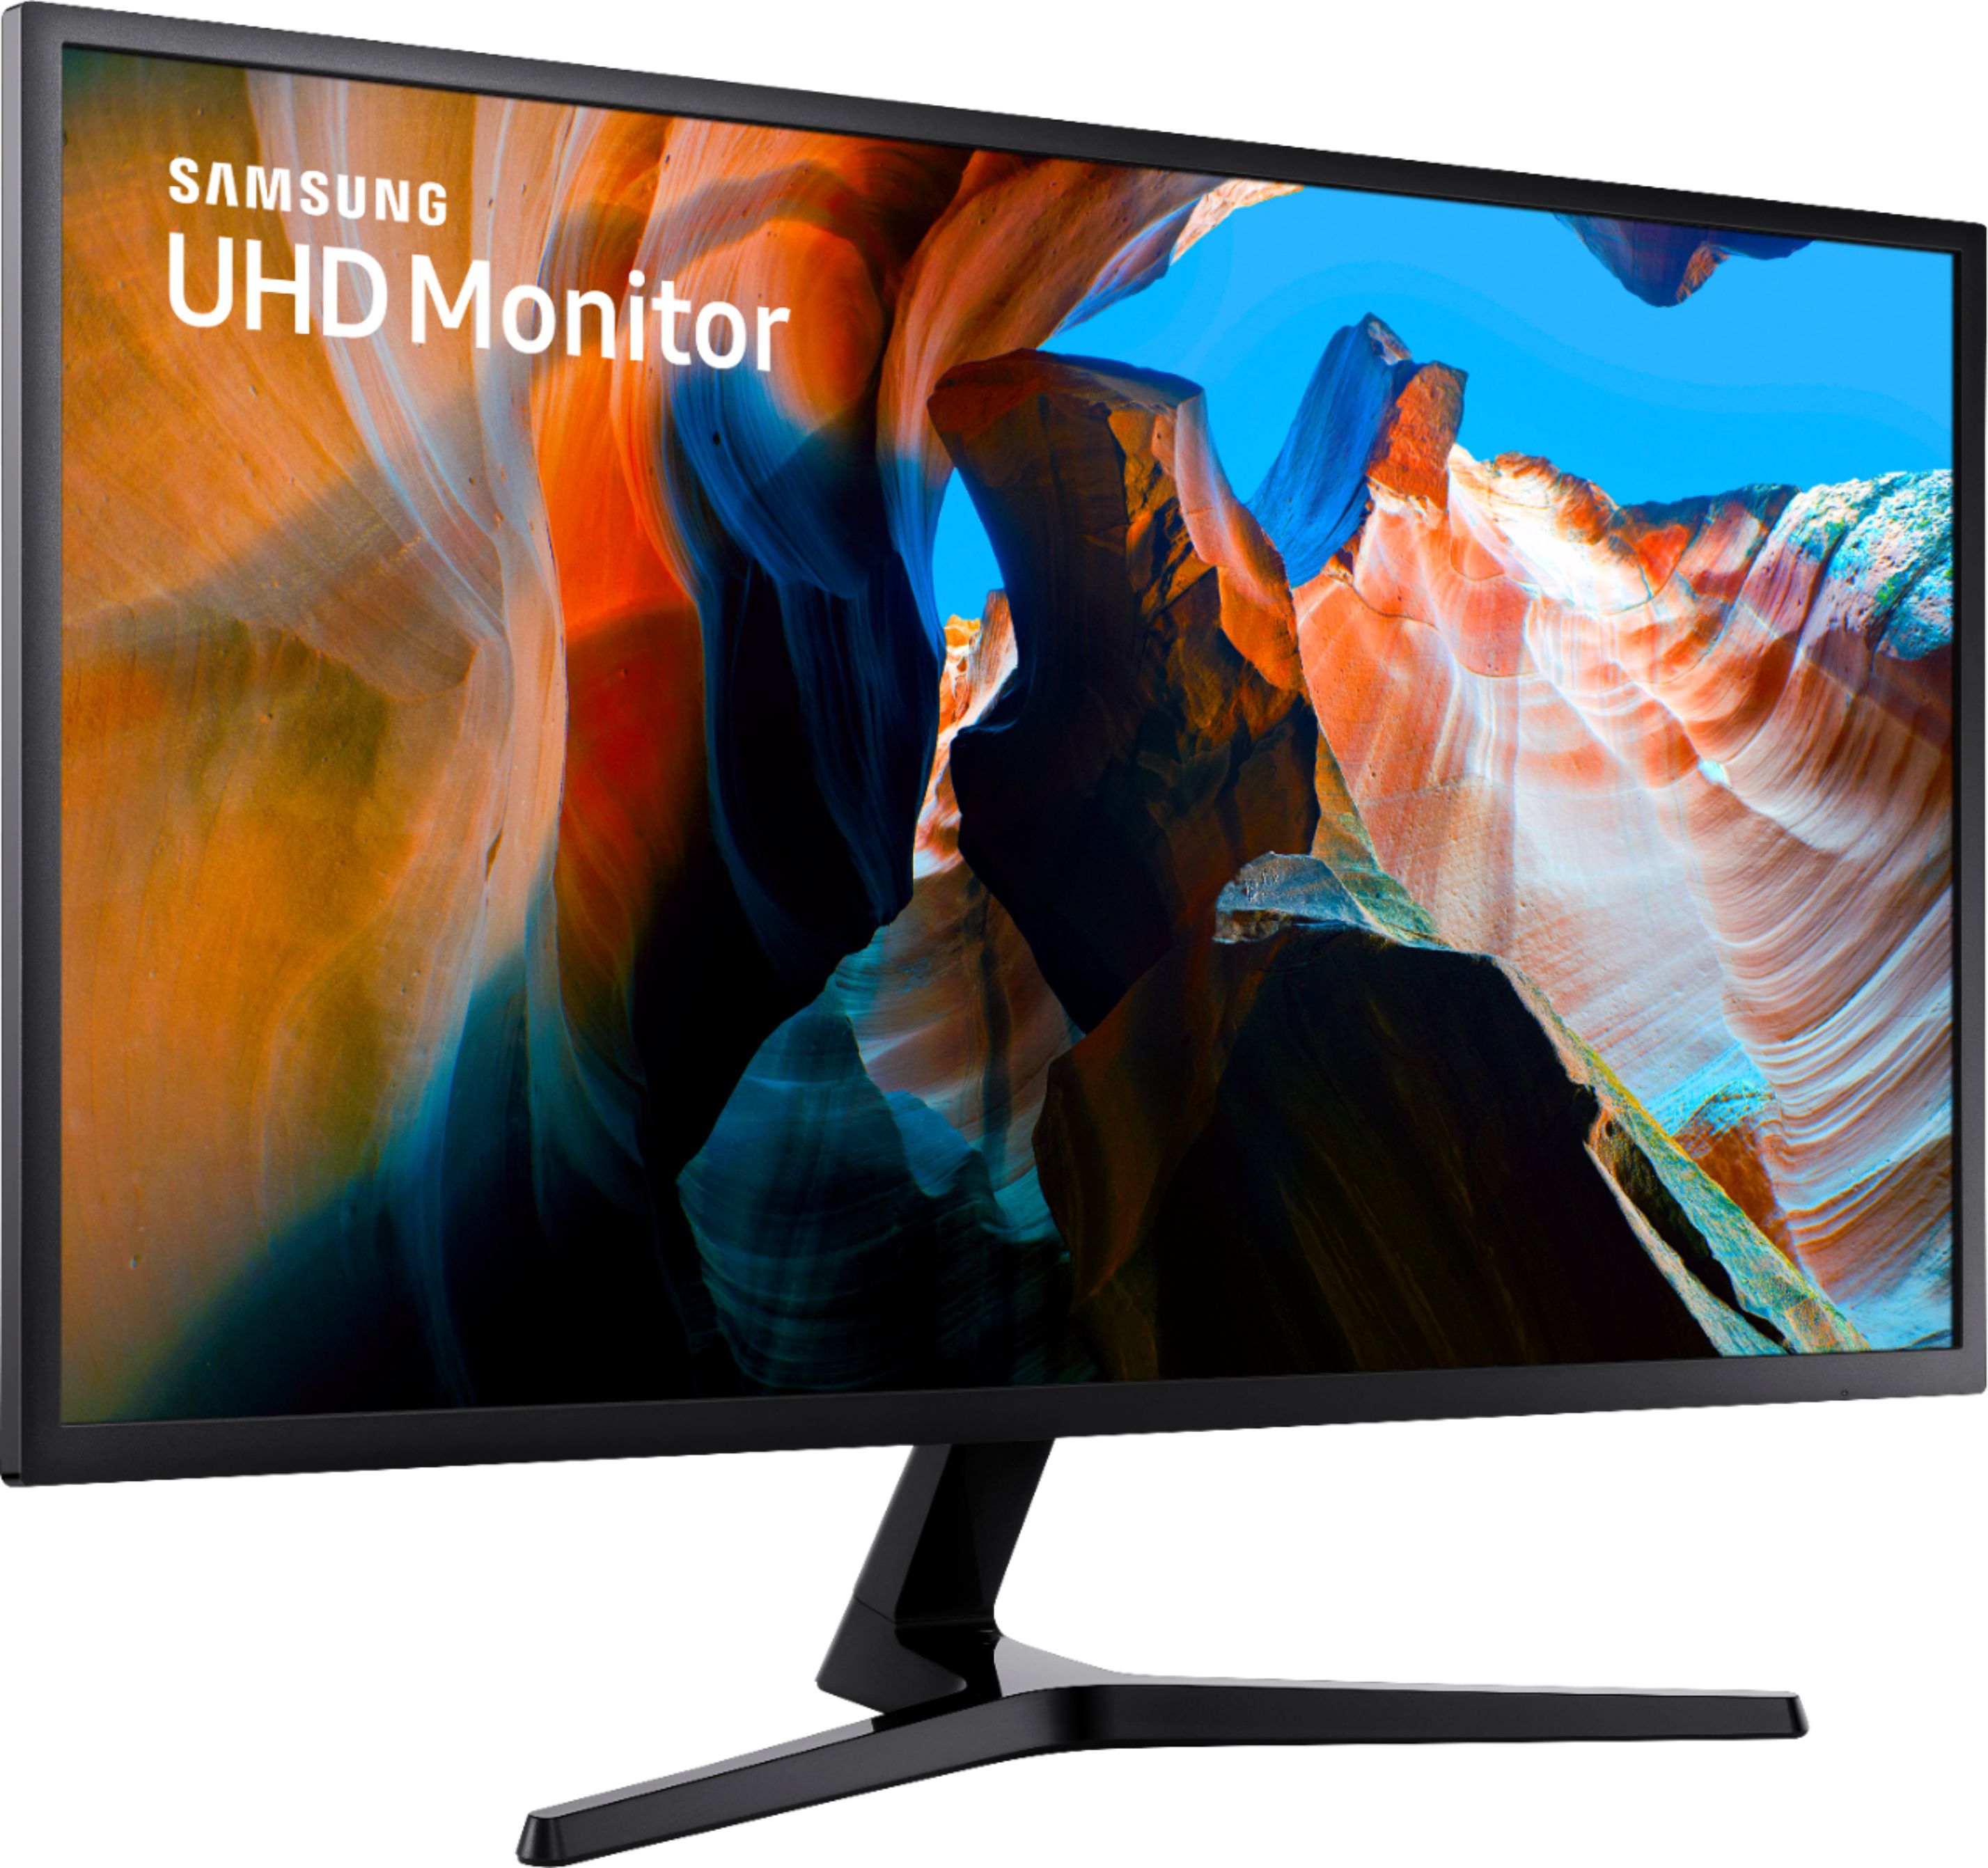 Angle View: Samsung - G77 Series  32" Curved WQHD Gaming Monitor With Special T1 Faker Design (HDMI, USB) - Black